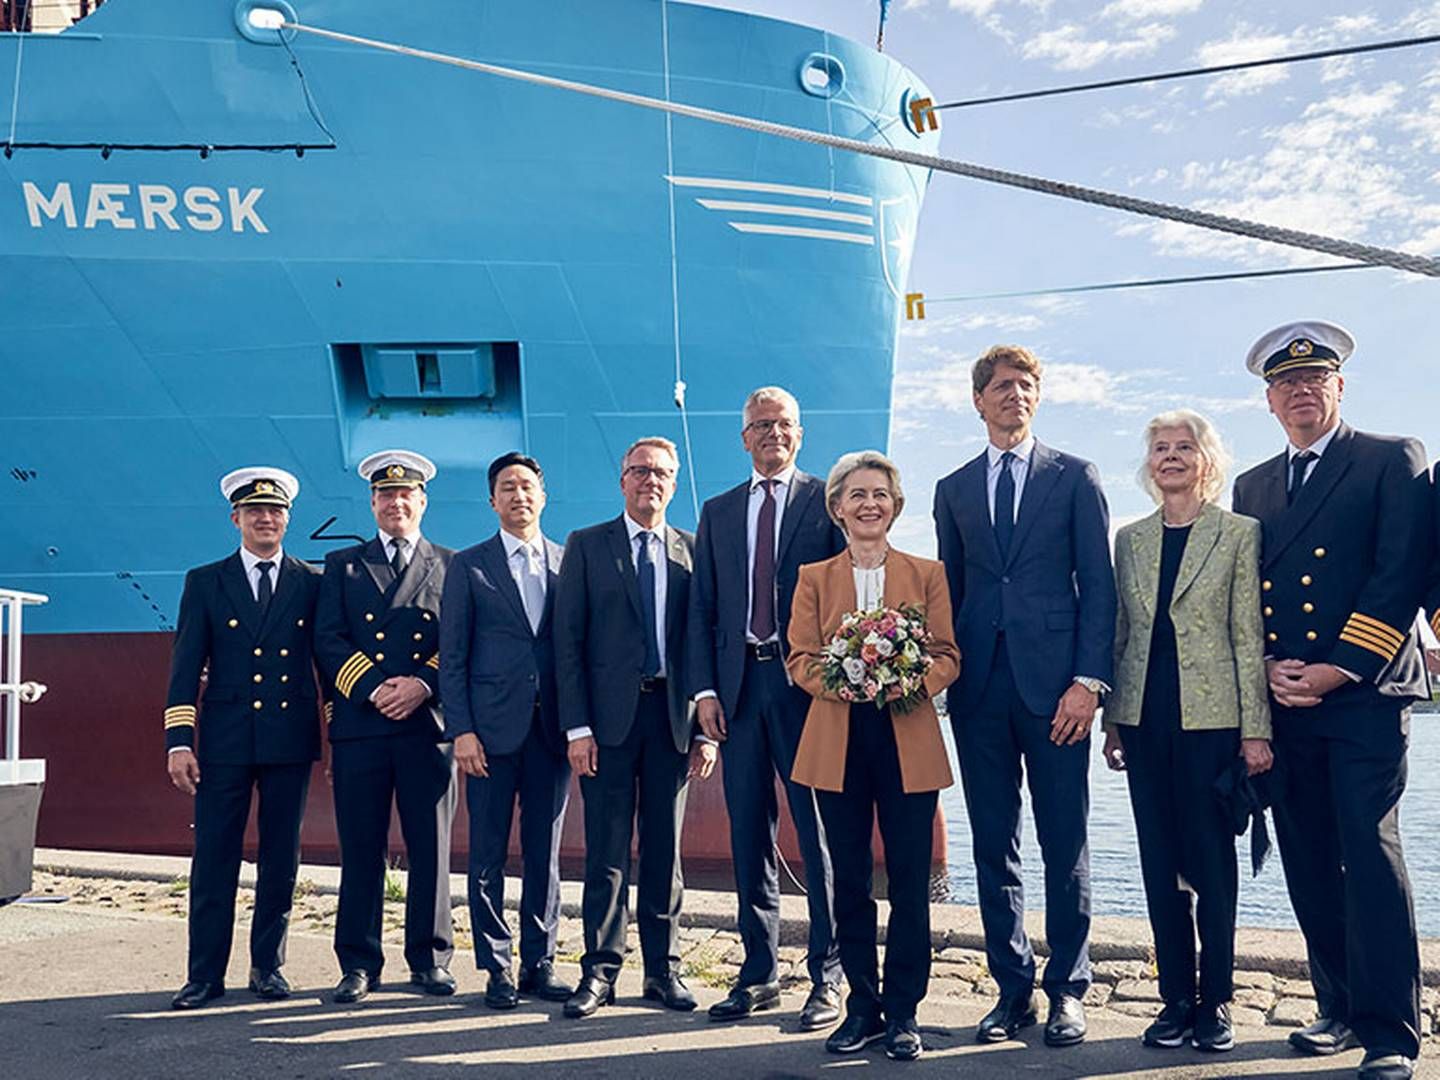 It was EU Commission President Ursula von der Leyen who named the world's first methanol-powered container ship Laura Maersk in September last year. | Photo: Maersk